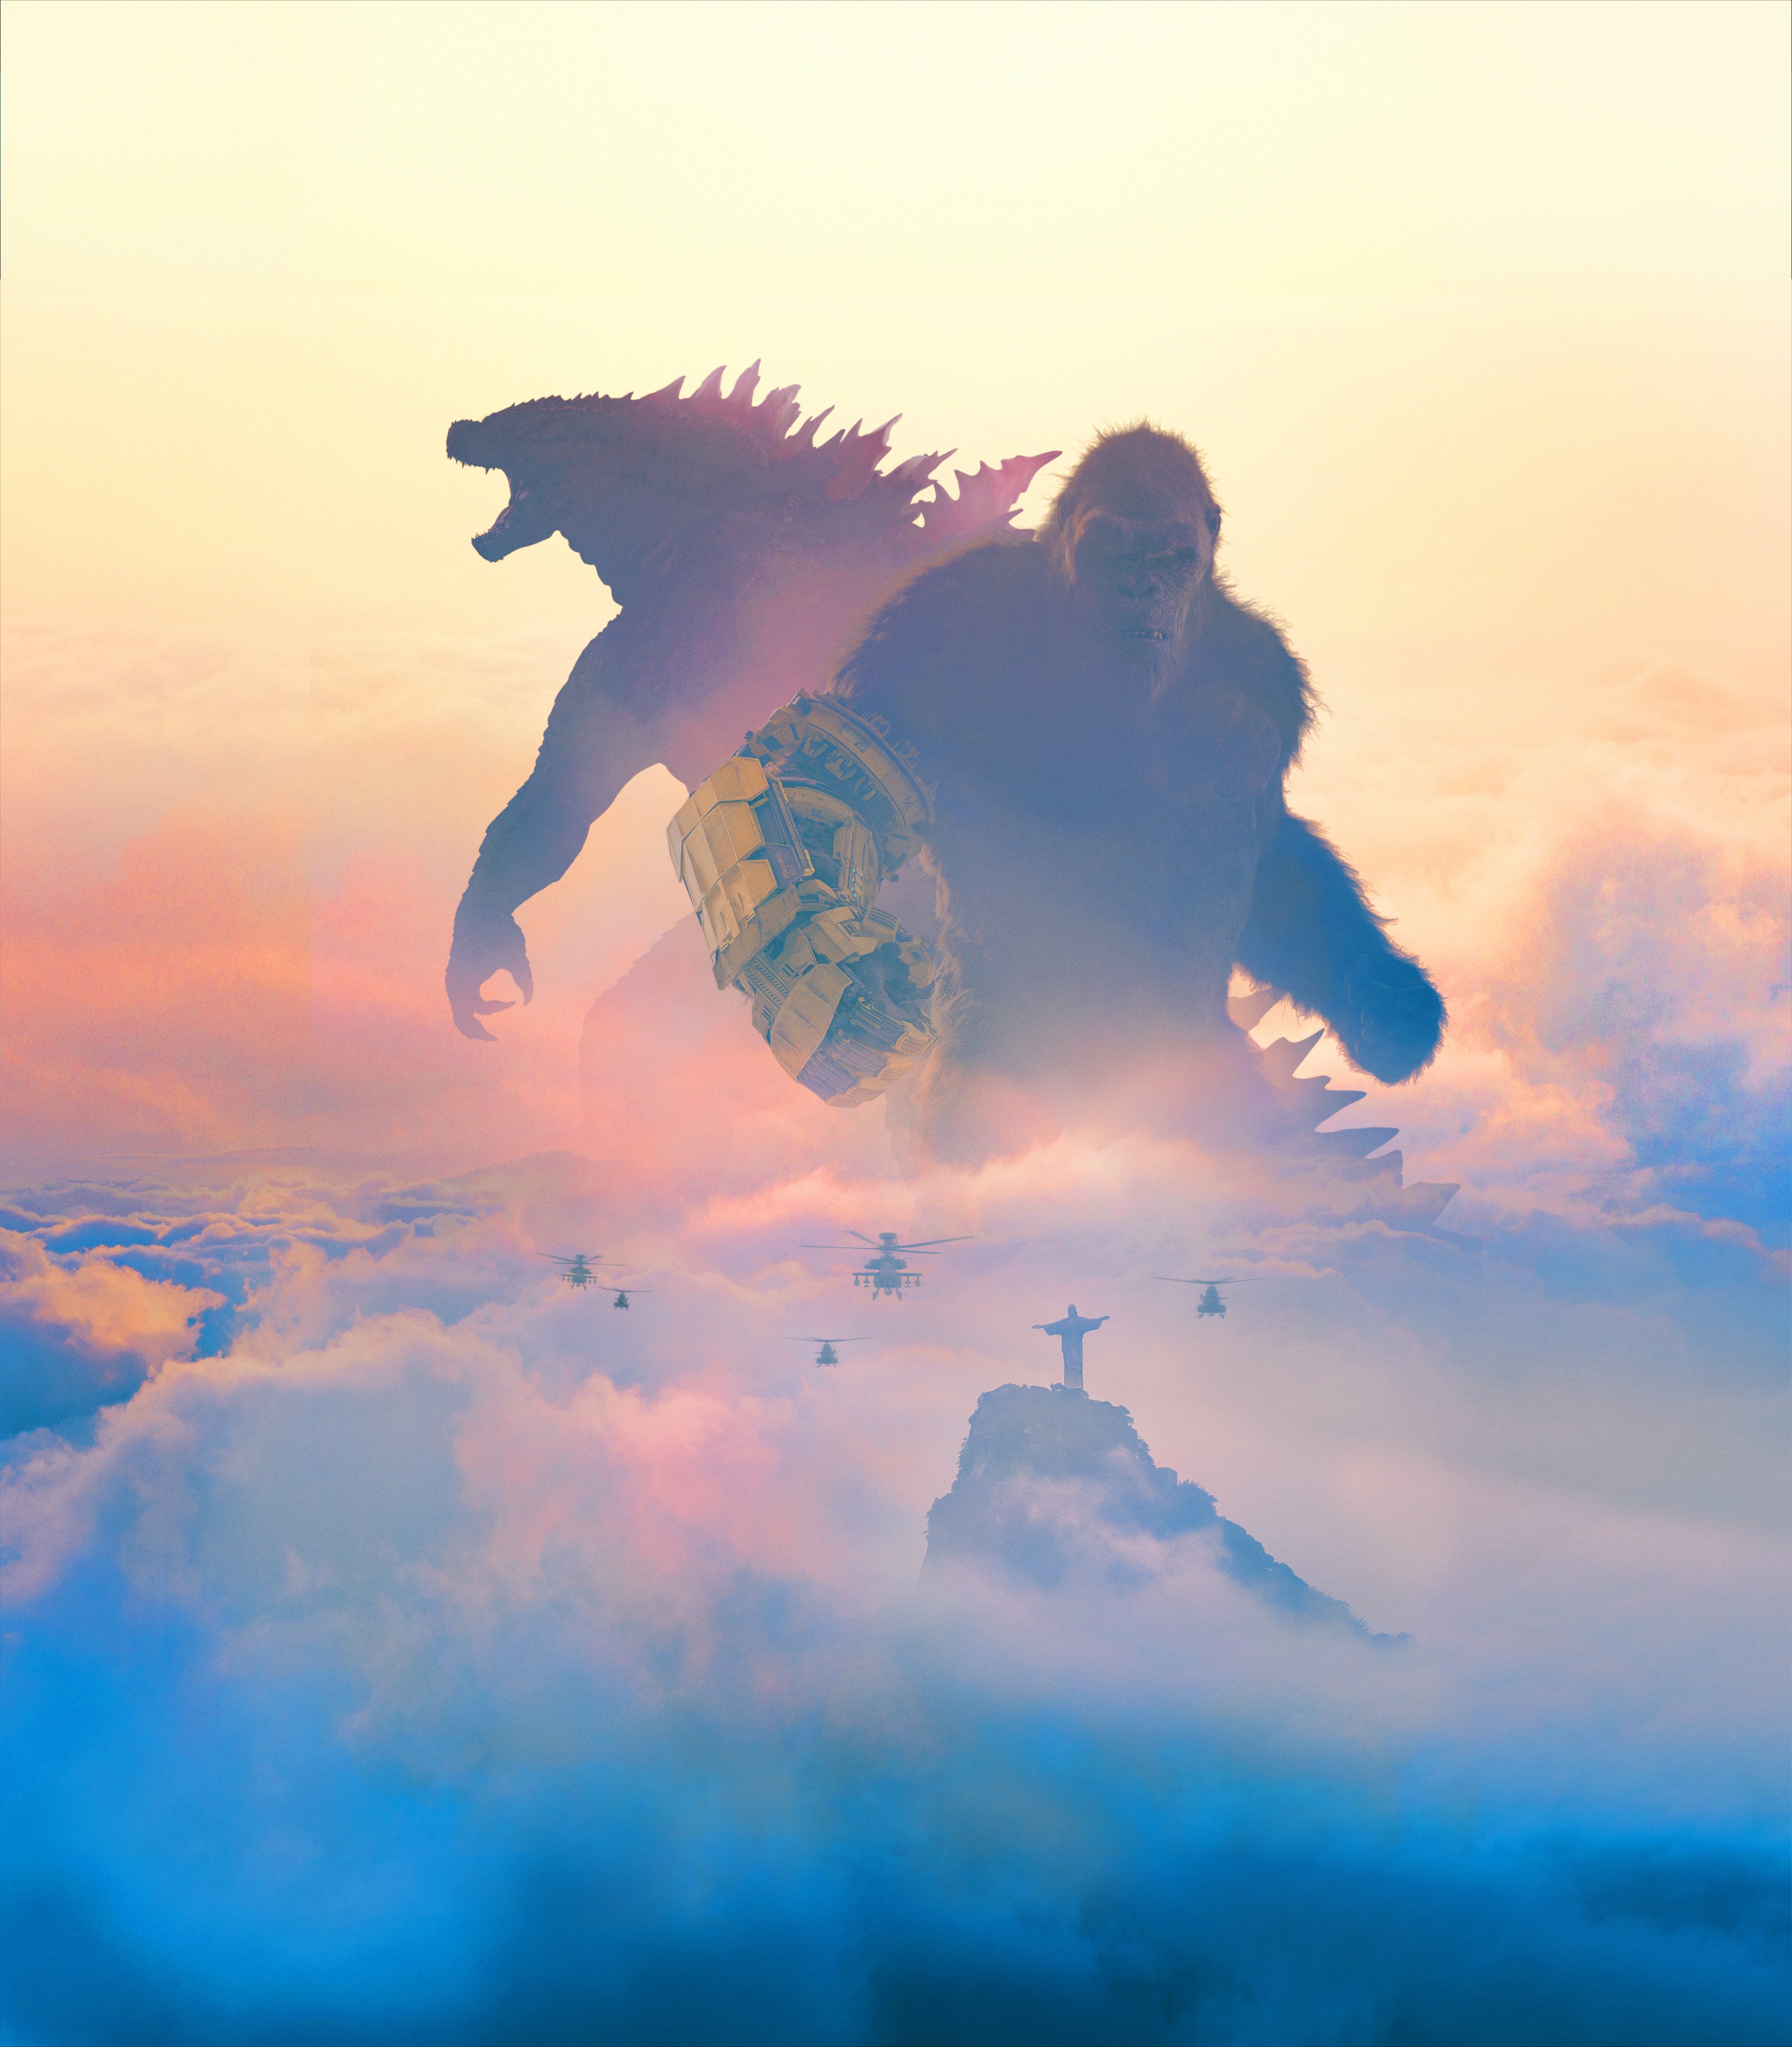 Godzilla x Kong: The New Empire wallpaper Resolution 3586x4096 | Best Download this awesome wallpaper - Cool Wallpaper HD - CoolWallpaper-HD.com